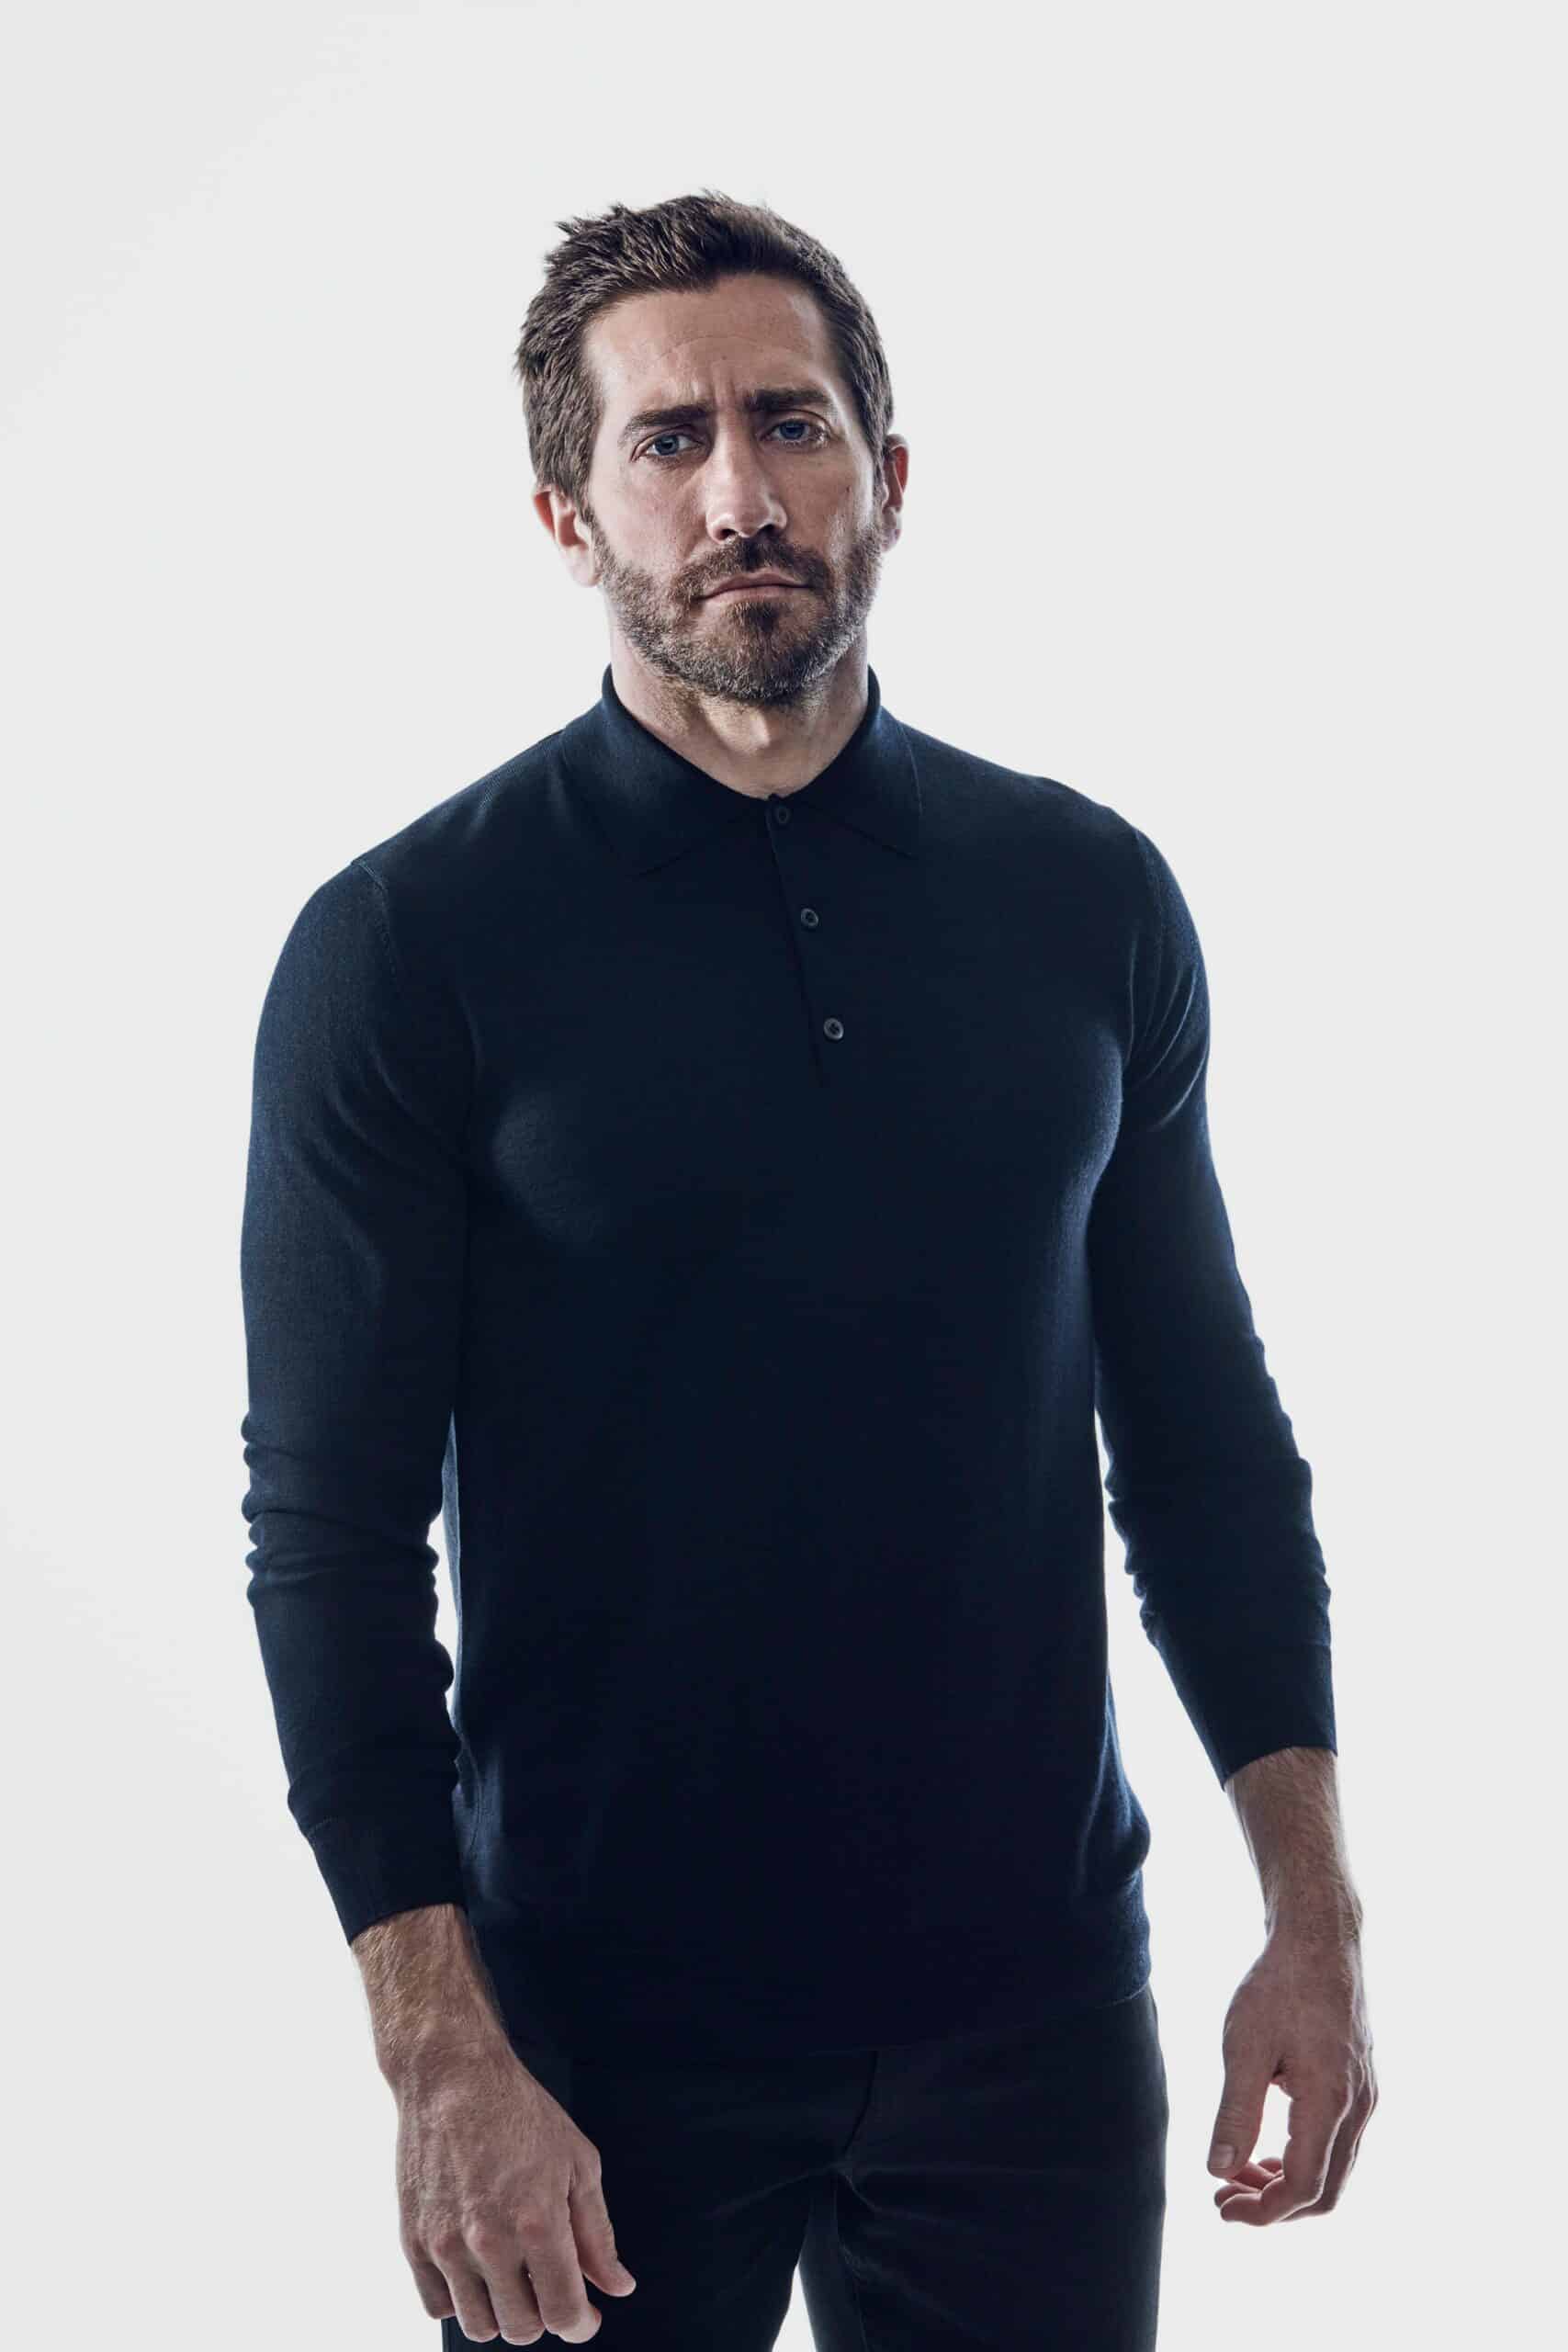 Jake Gyllenhaal collaborates with Prada and encourages people to care for nature.